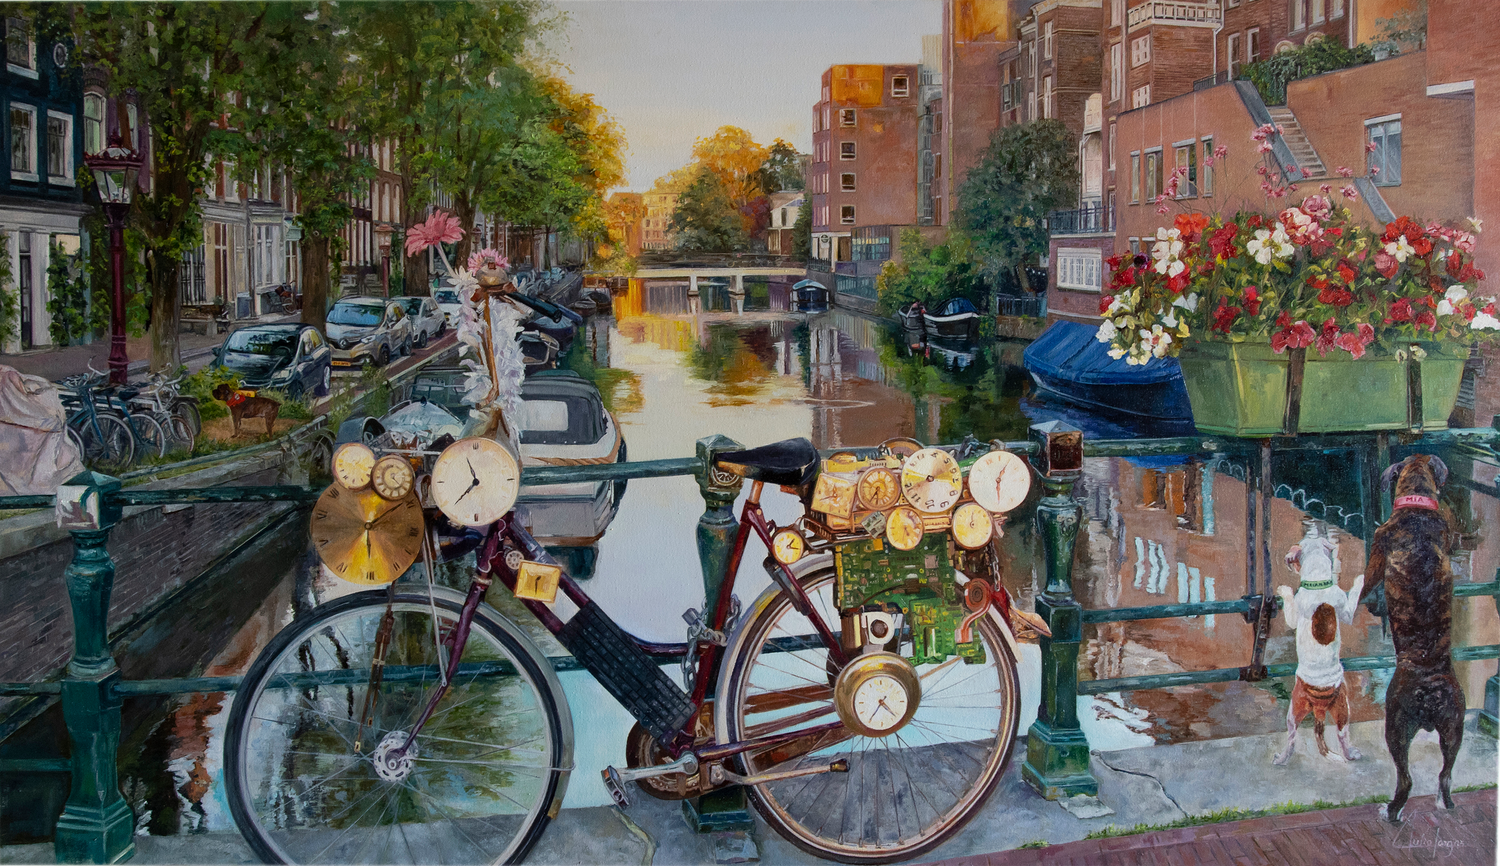 Amsterdam painting with our pets added, bike, flowers, venice canals, boxer dog, iol on canvas, floated frame